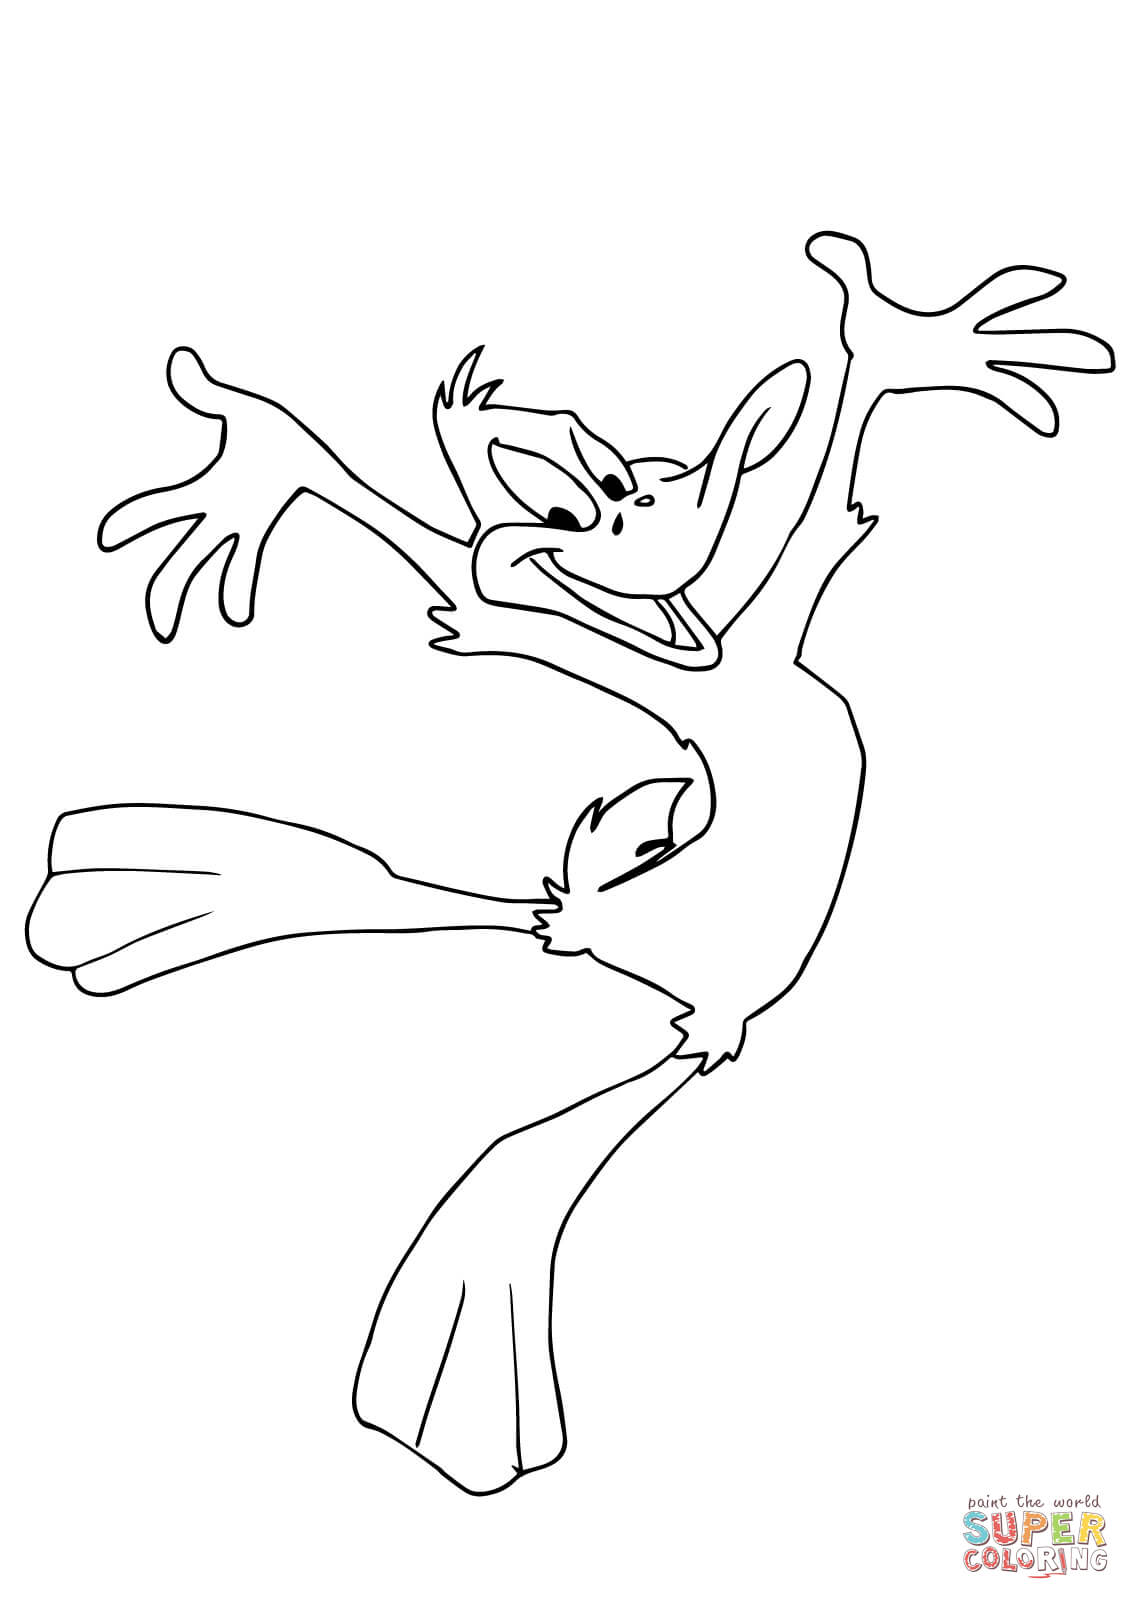 Happy daffy duck coloring page free printable coloring pages